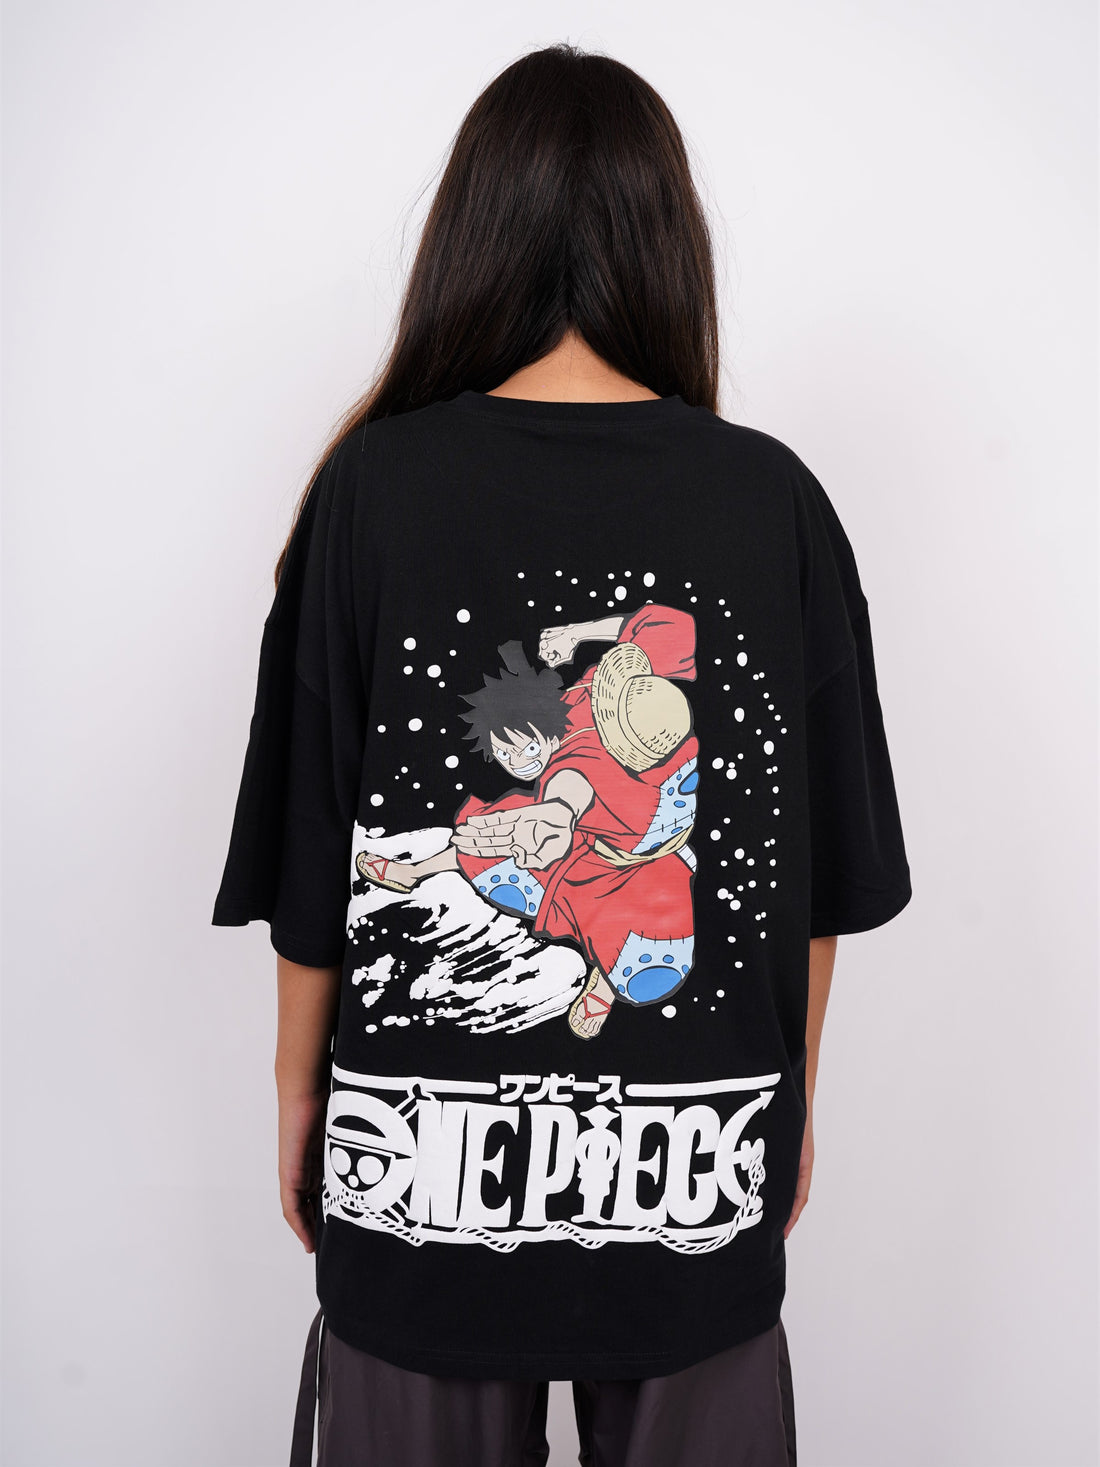 Monkey d. Luffy - One Piece Drop Sleeved  Tee   For Men and Women